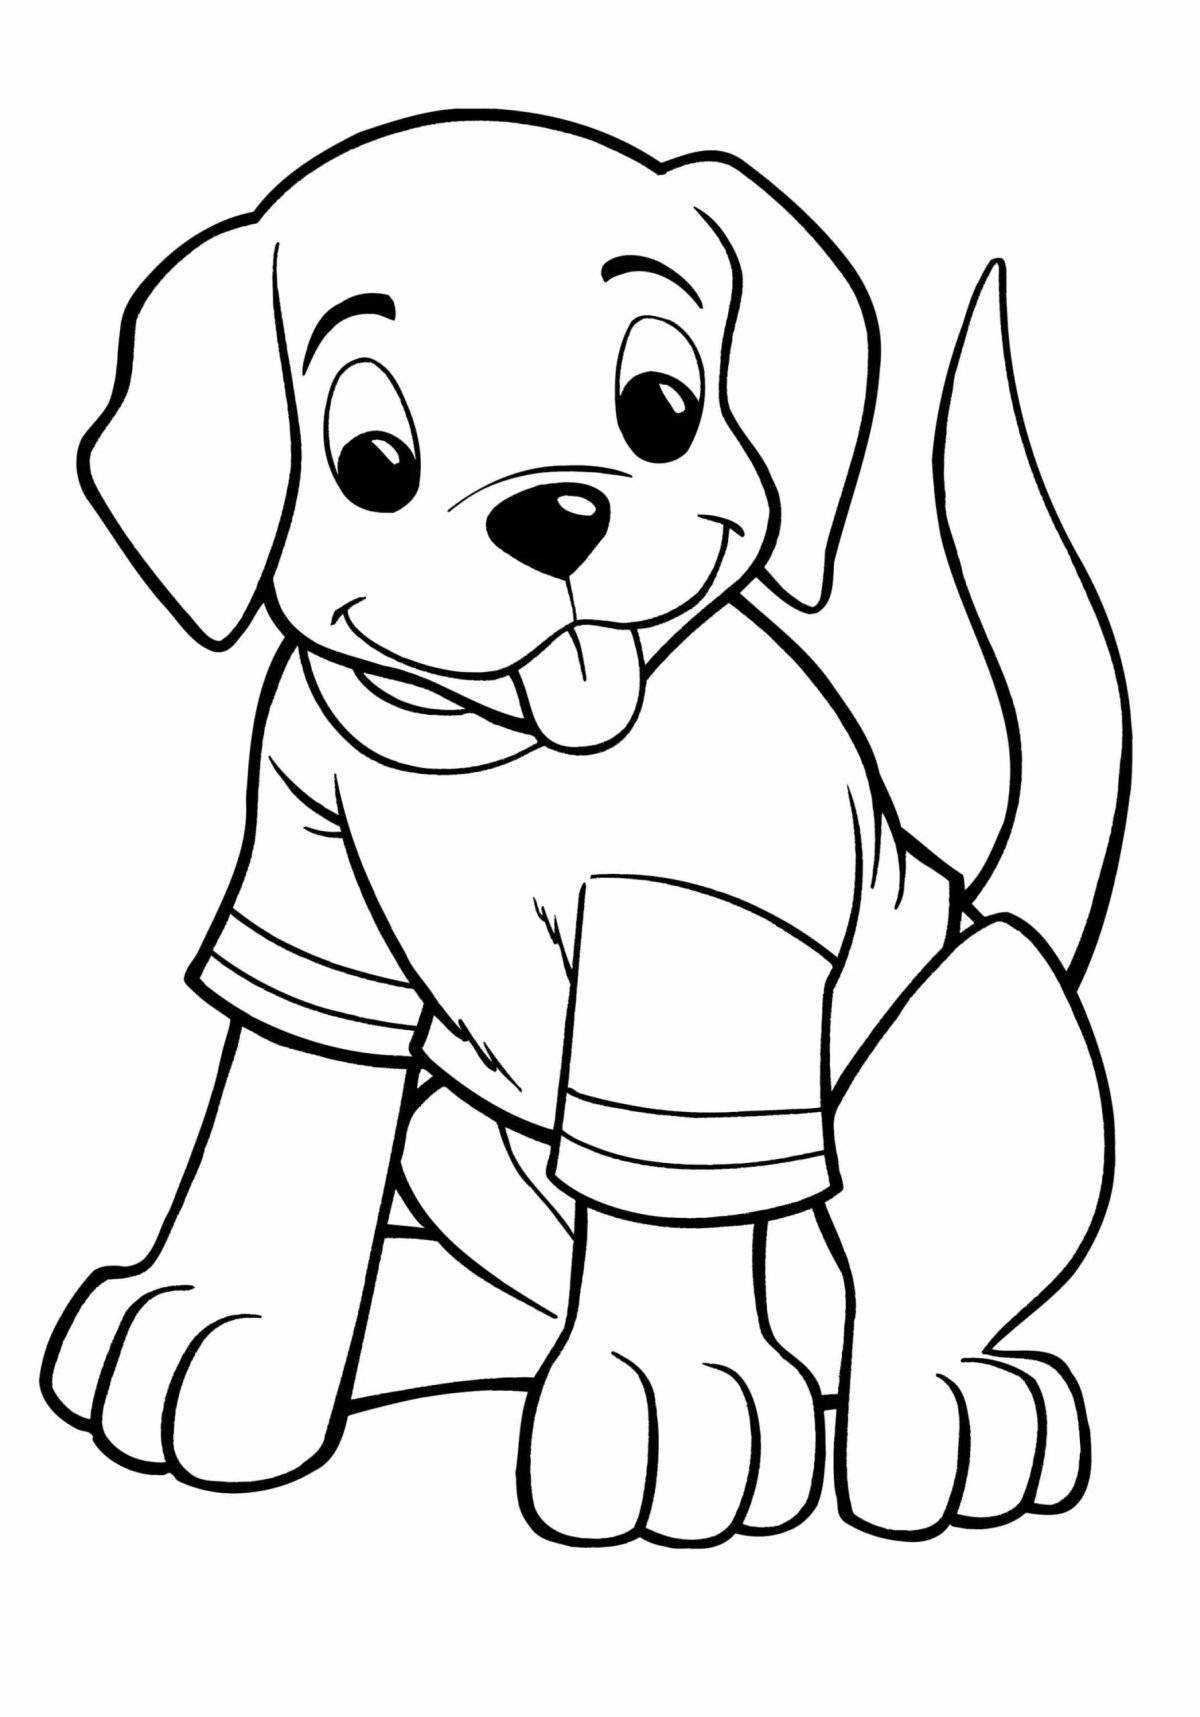 Cute dog coloring book for 3-4 year olds